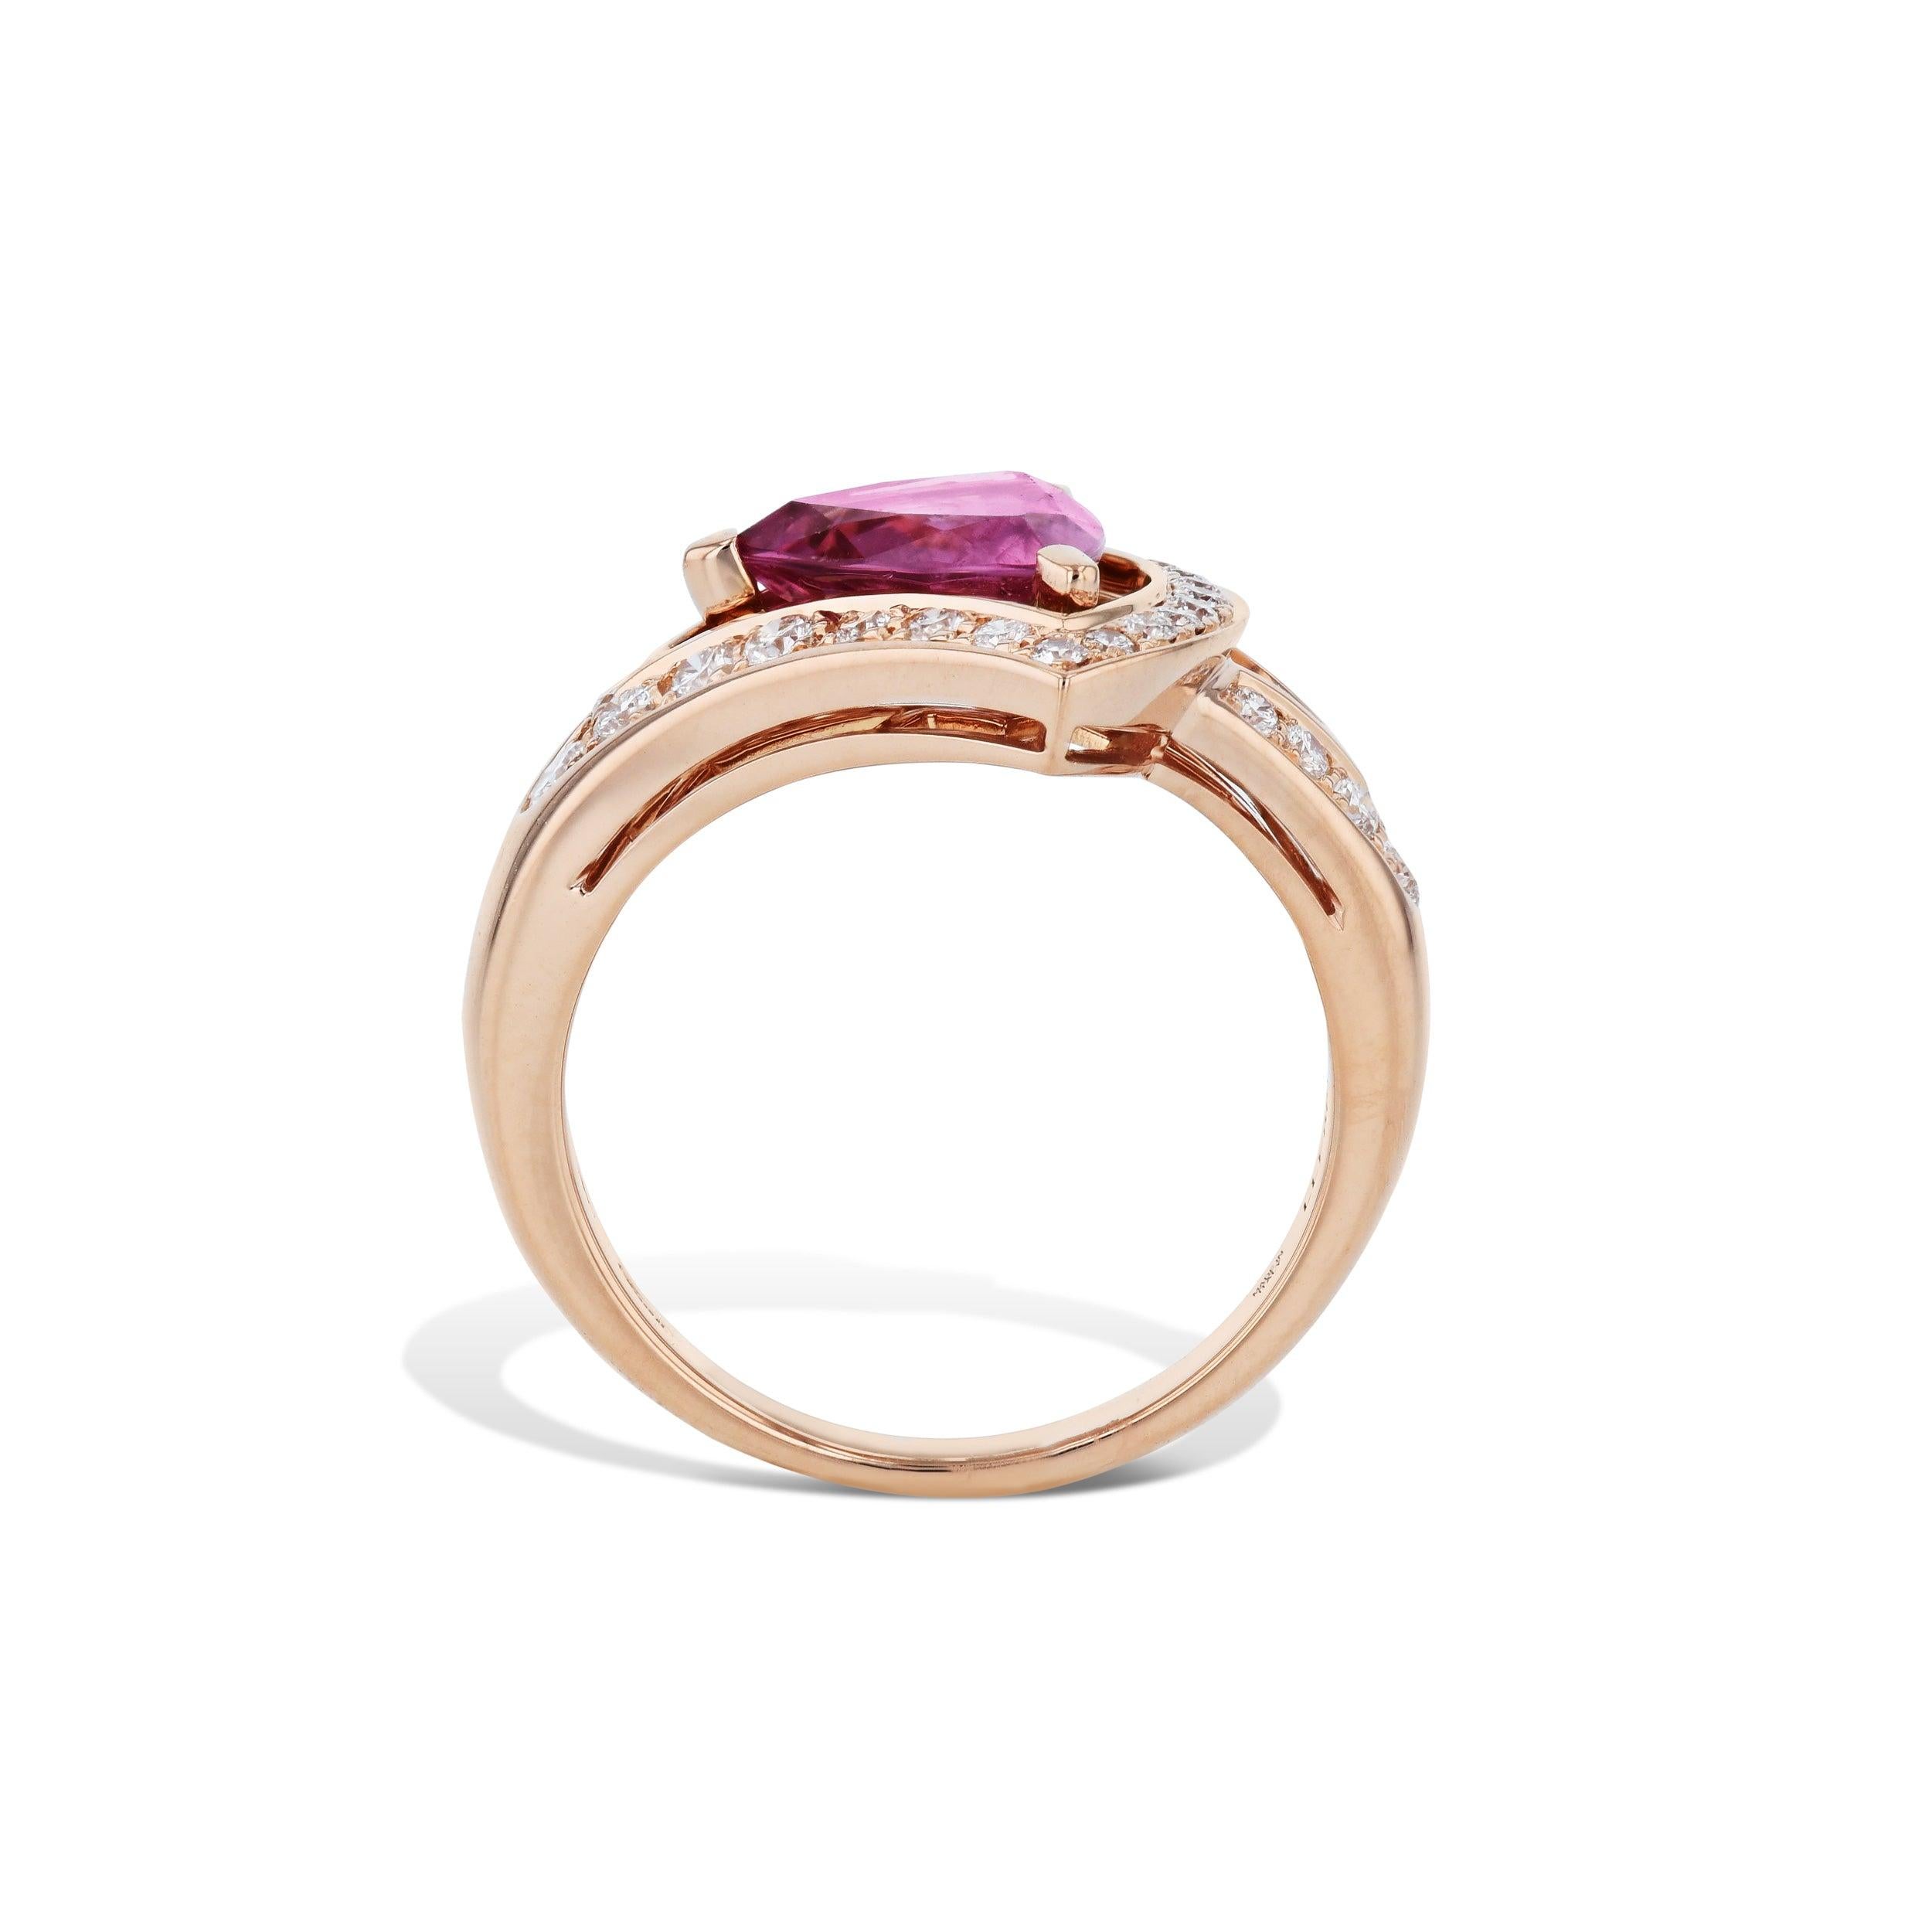 Be inspired by the spectacular Bvlgari Divas Dream Estate Ring. Crafted from shimmering 18kt rose gold set with dazzling pink tourmaline and diamonds. This gorgeous 